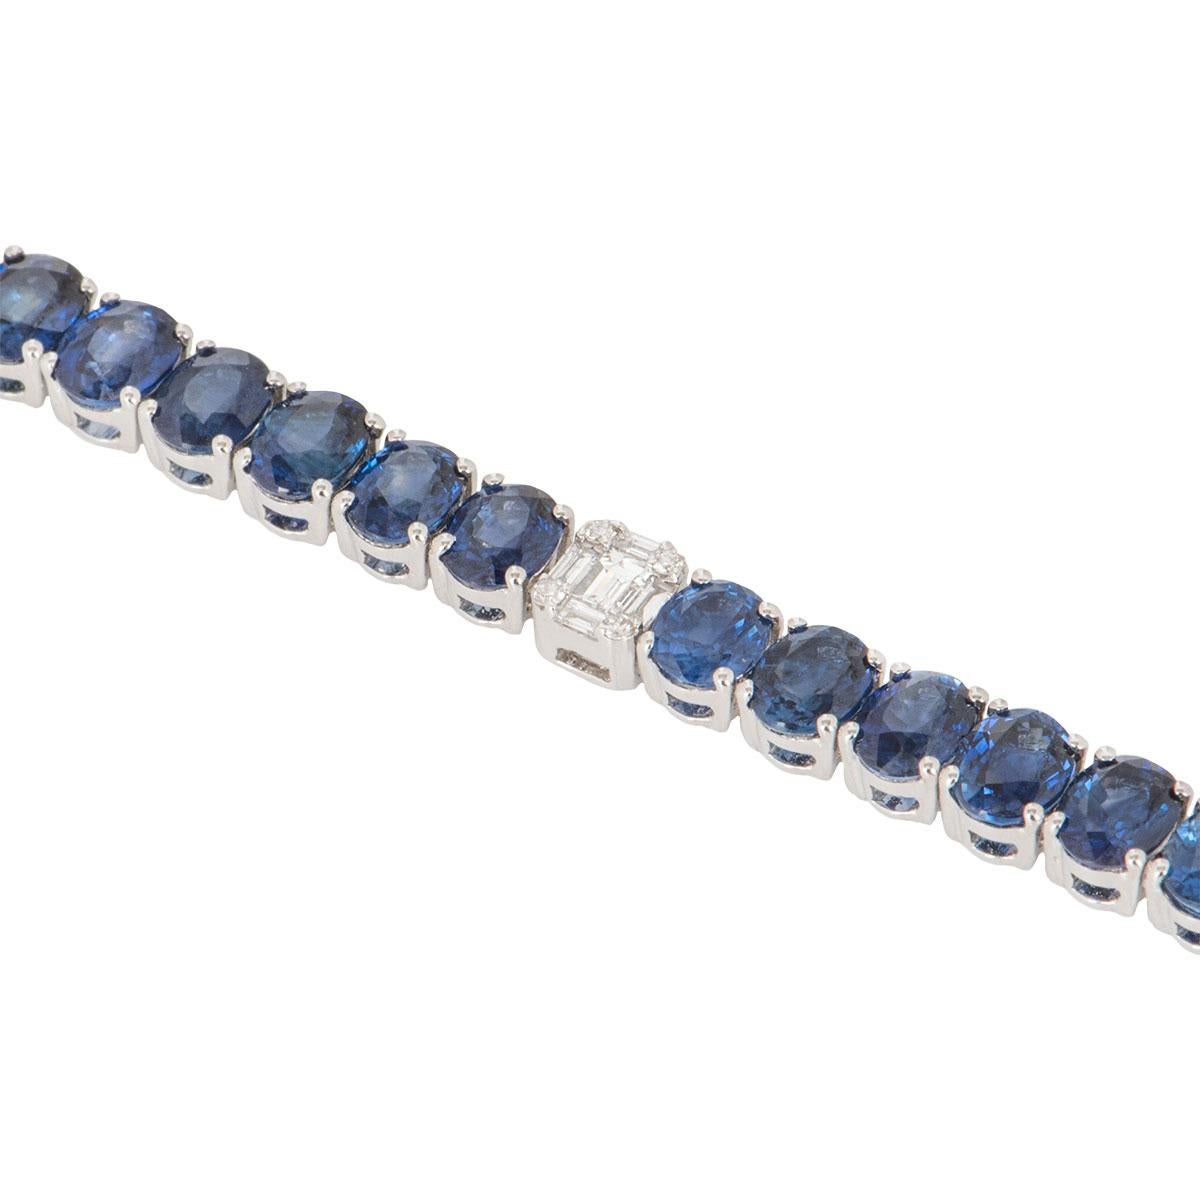 An 18k white gold diamond and sapphire line bracelet. The bracelet features 54 illusion set diamonds alternating with 42 oval cut sapphires. The diamonds have a total weight of 0.62ct and the sapphires have a total weight of 14.84ct. The bracelet